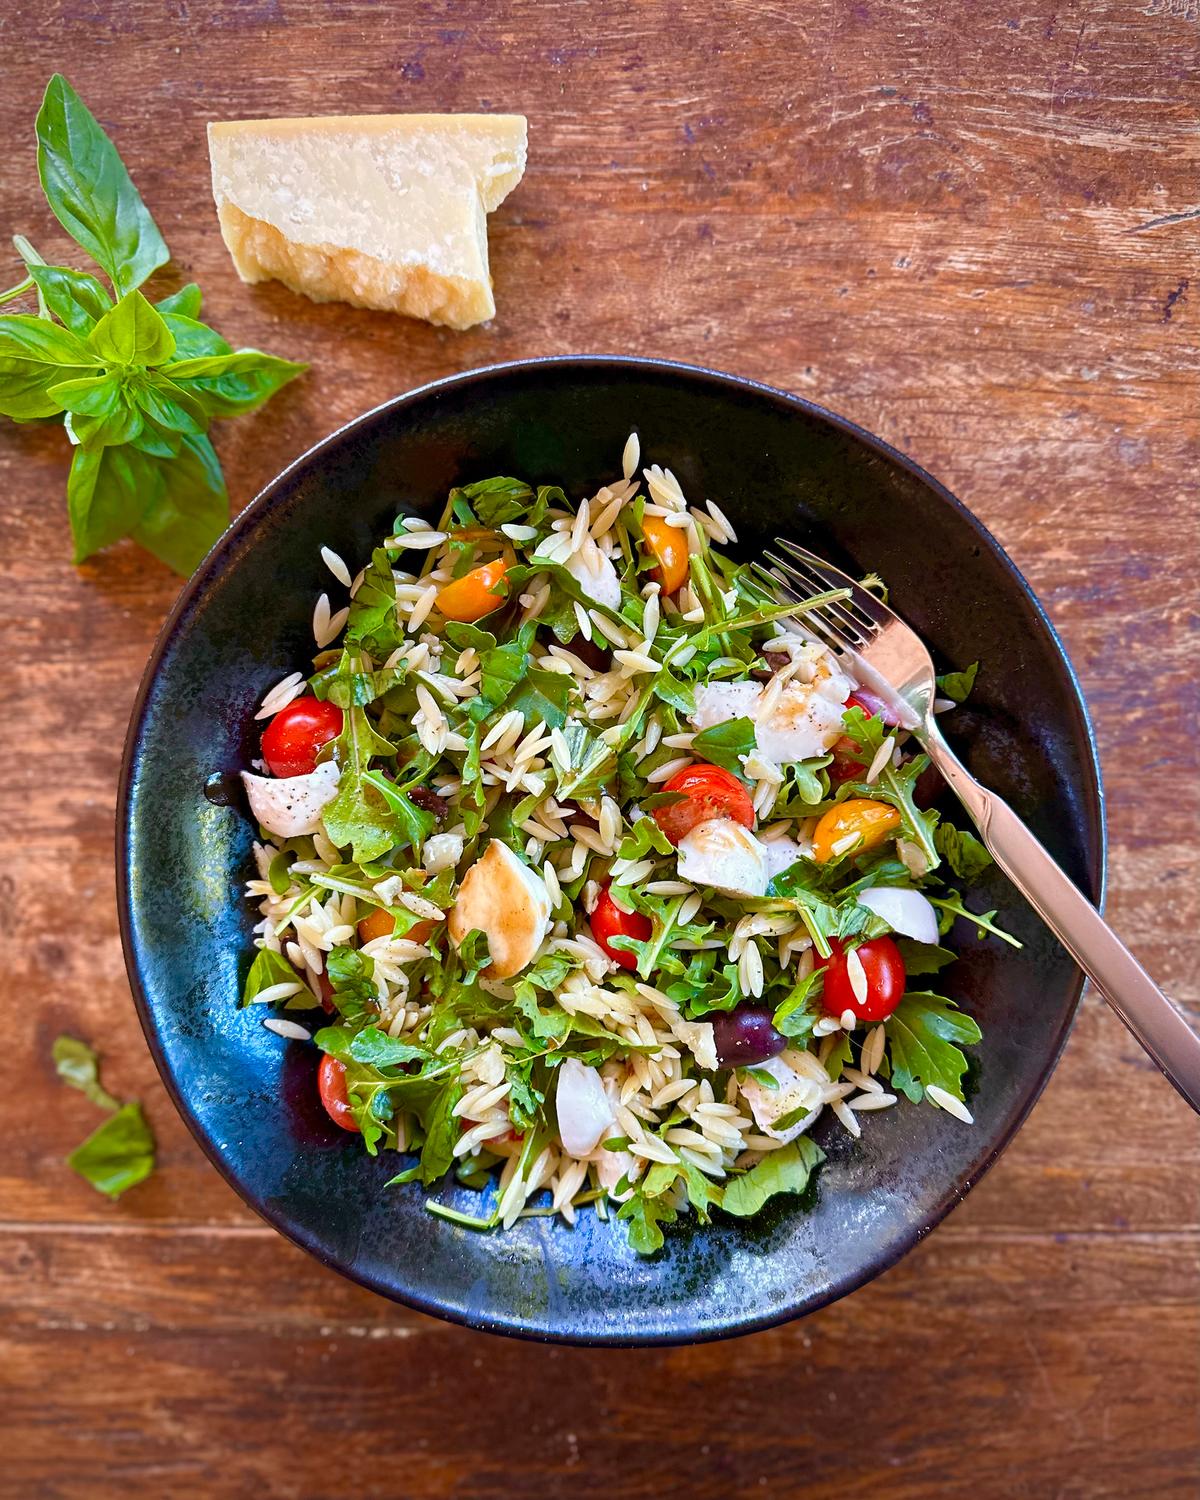 In this summer salad, the emphasis is on the vegetables rather than a carb-laden bowl of pasta interspersed with a few green leaves. (Lynda Balslev for Tastefood)